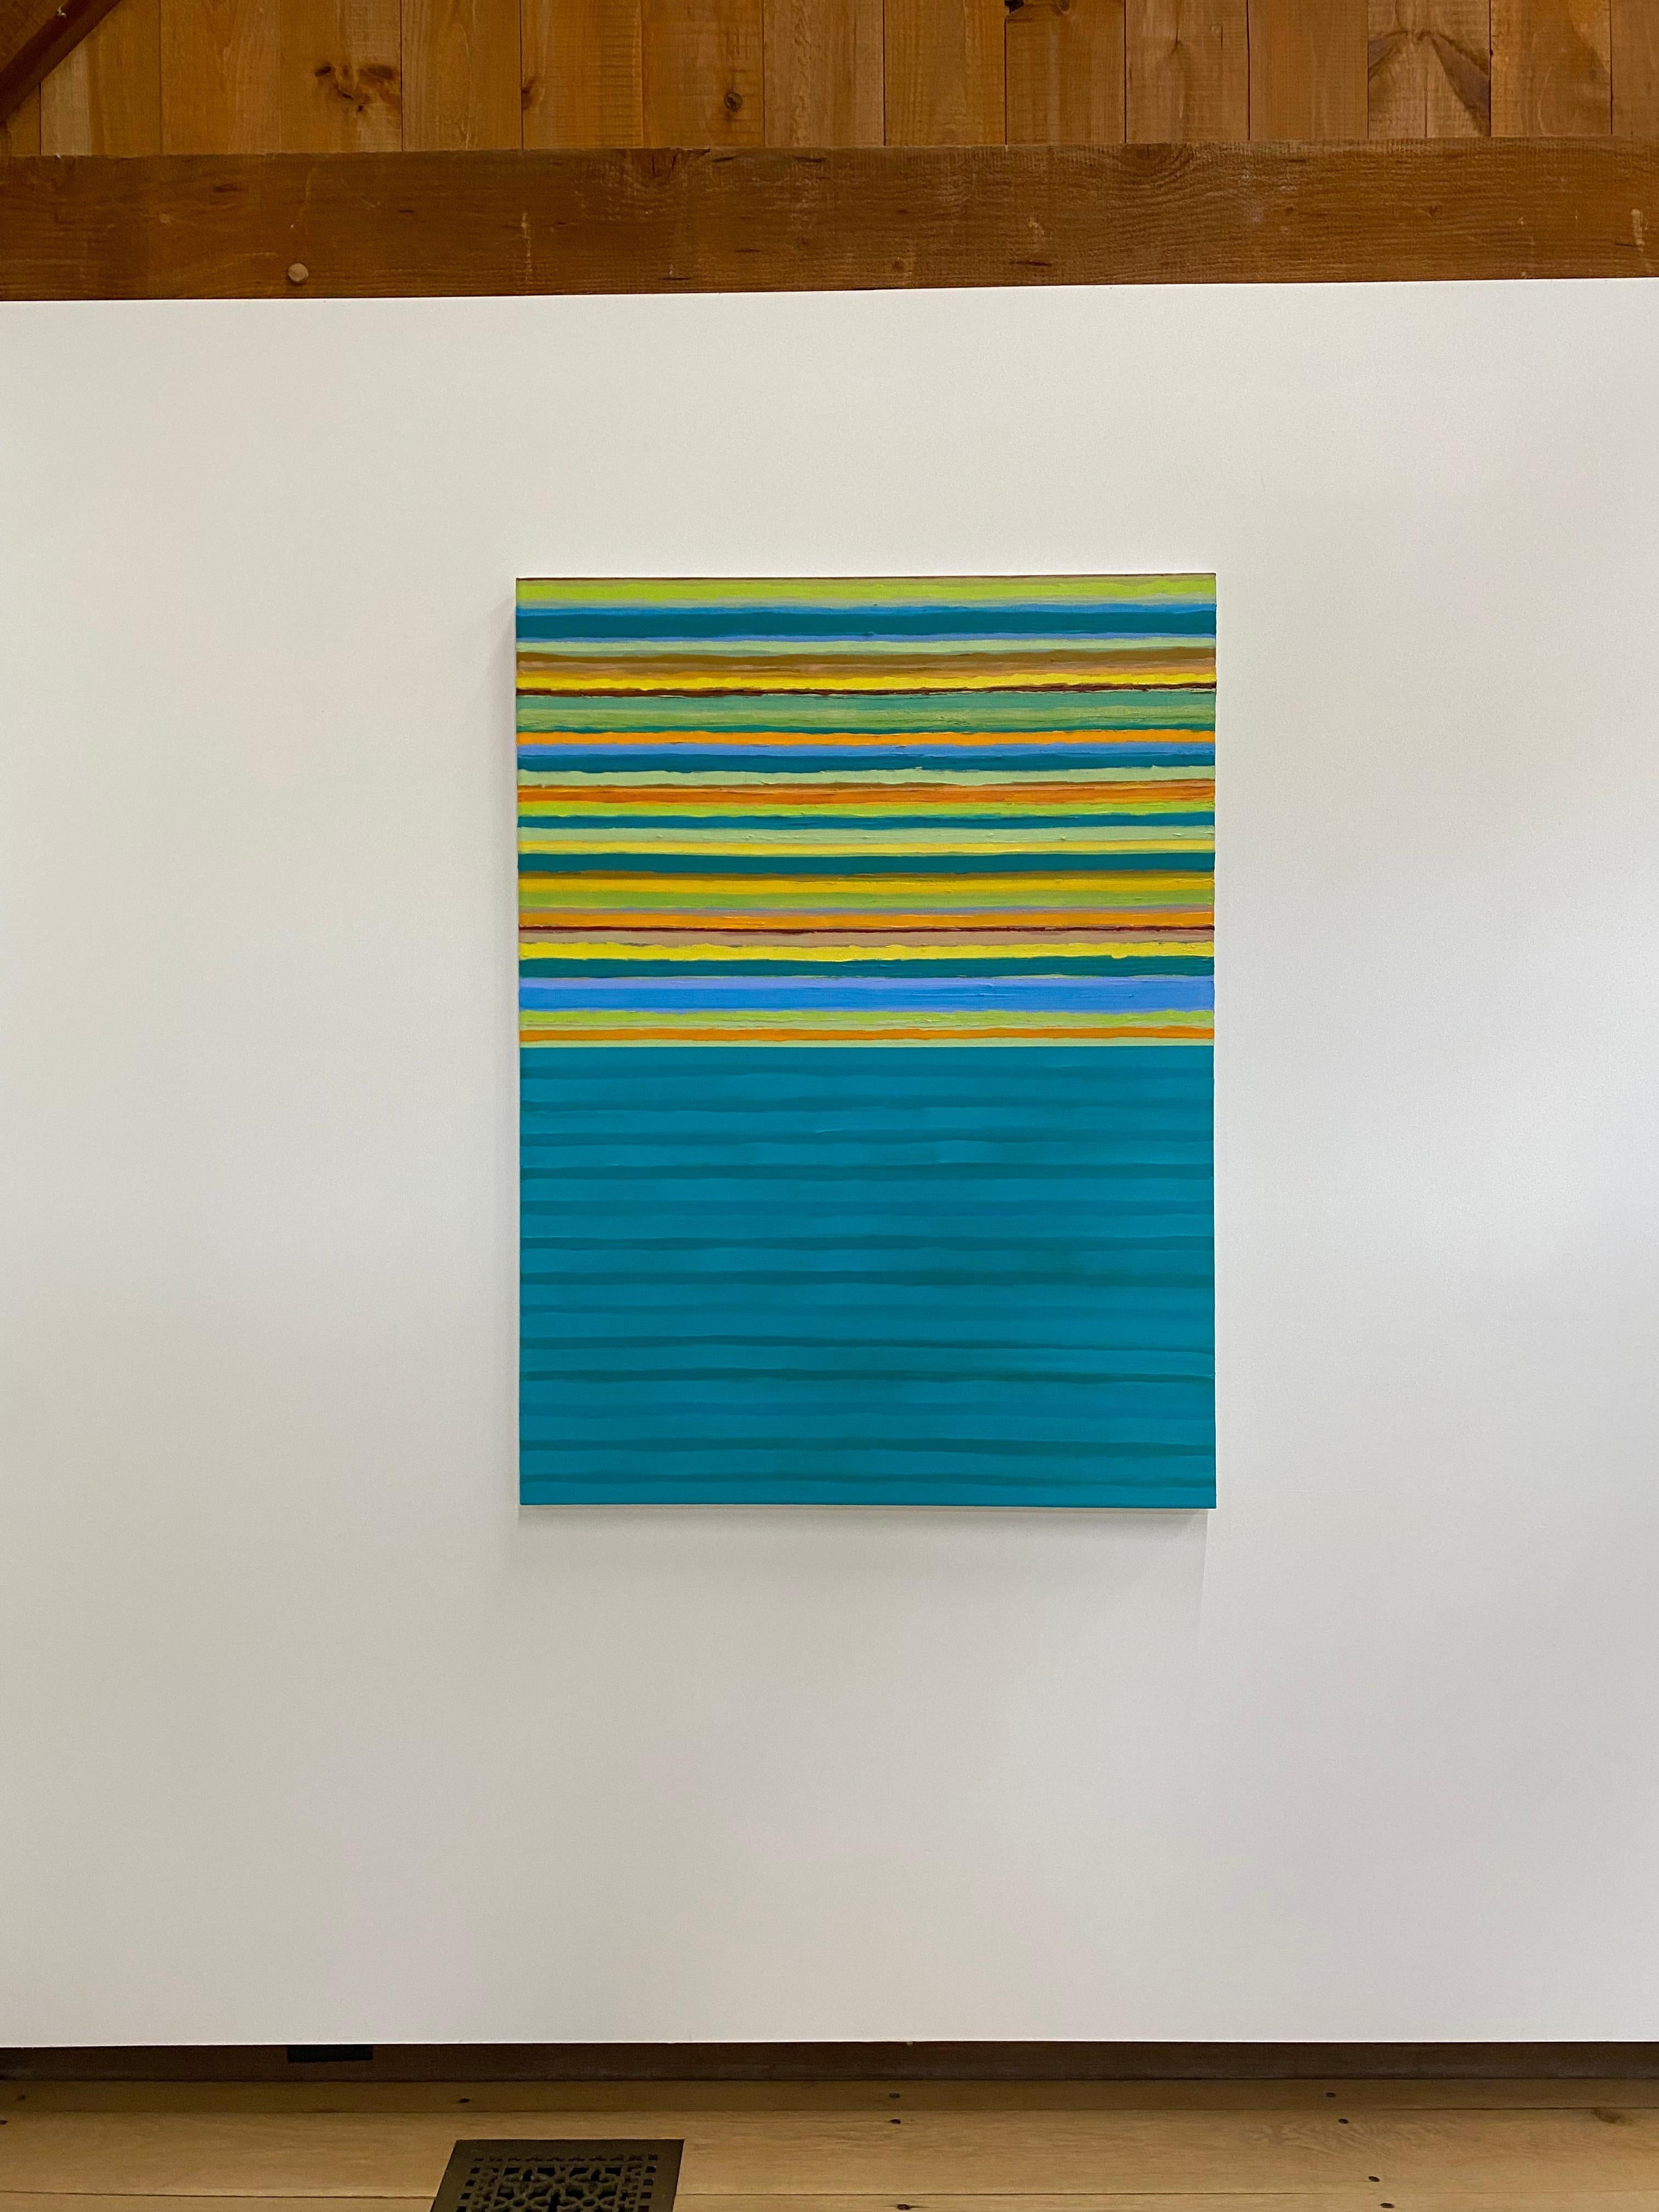 A bright multicolored painting with lime green, periwinkle, golden orange, yellow and burgundy red stripes against a luminous light aqua blue background. Signed, dated and titled on verso.

Joanne Mattera’s paintings can be described as lush